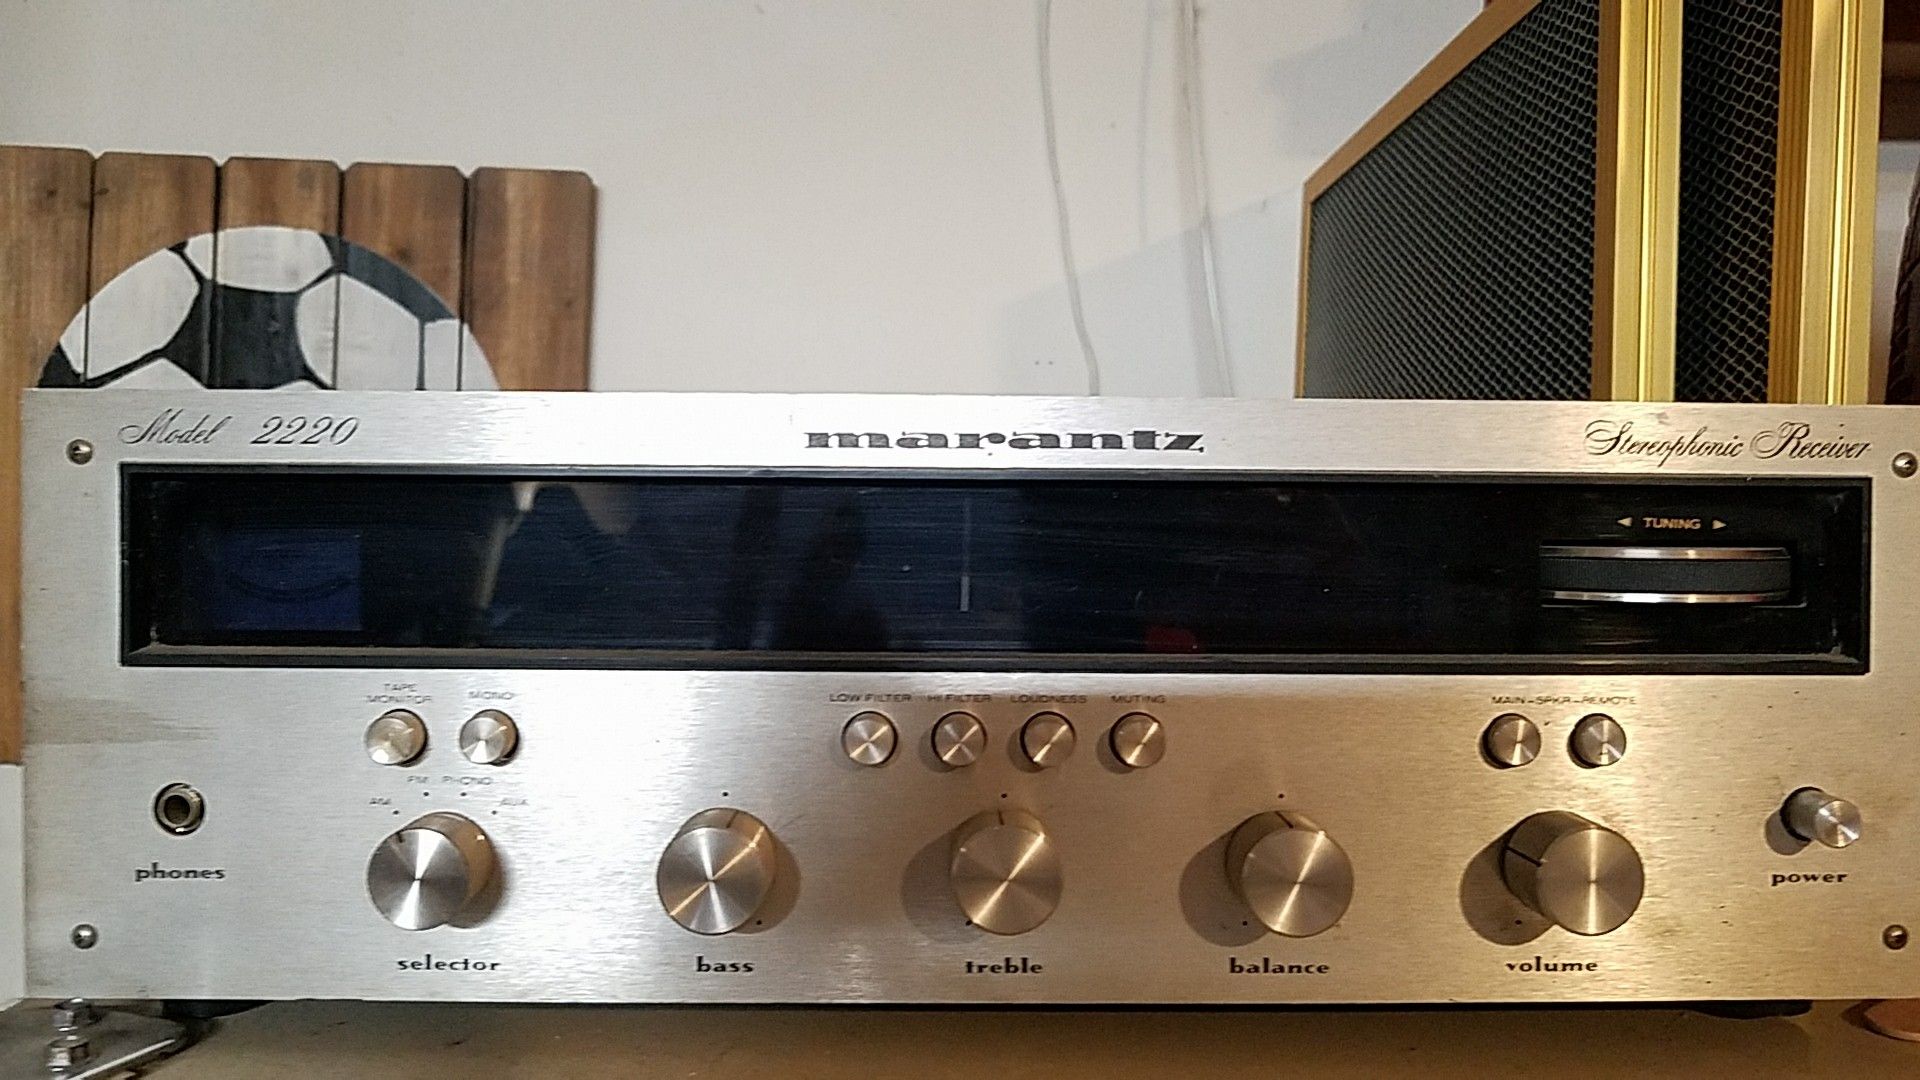 Marantz stereophonic receiver and speakers